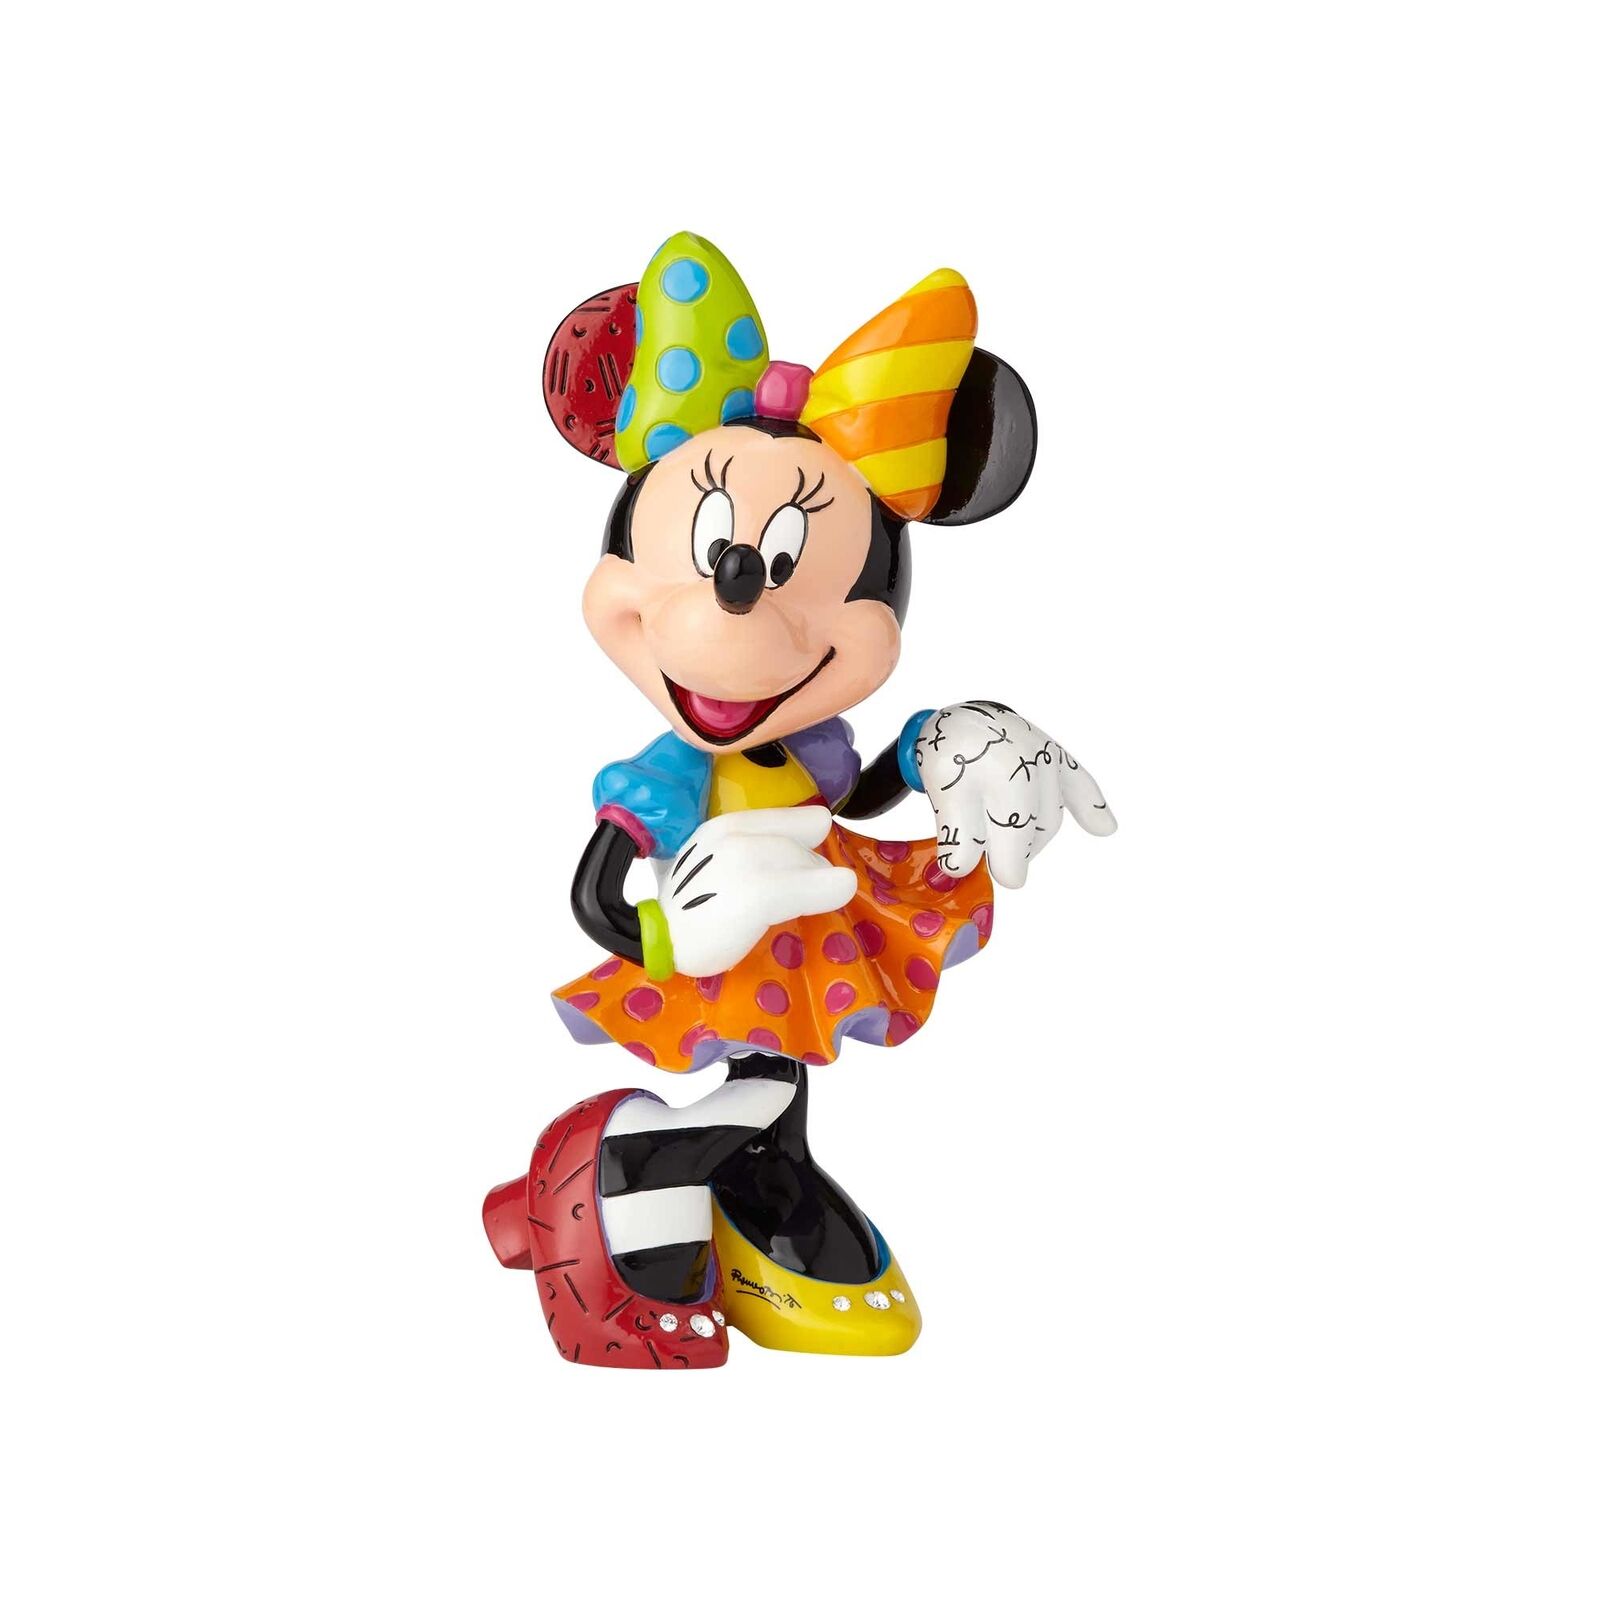 Enesco Disney by Britto Minnie Mouse Bling 90th Anniversary Figurine 10.24 Inch